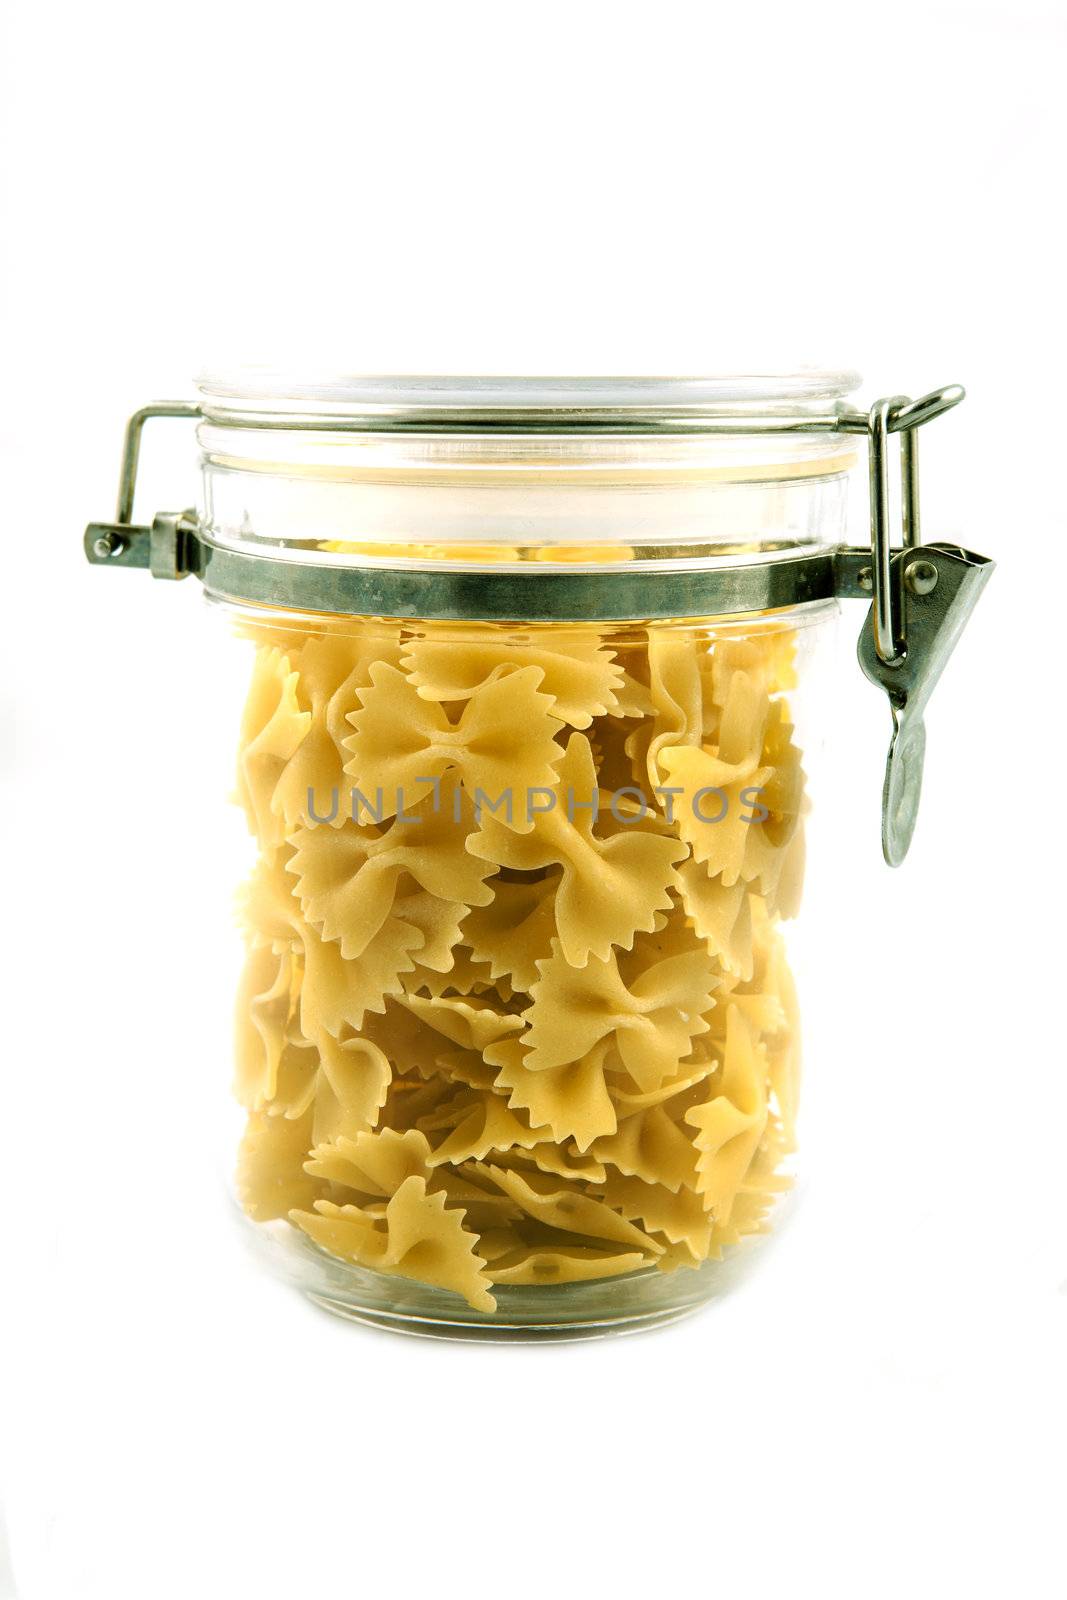 Pasta by PhotoWorks